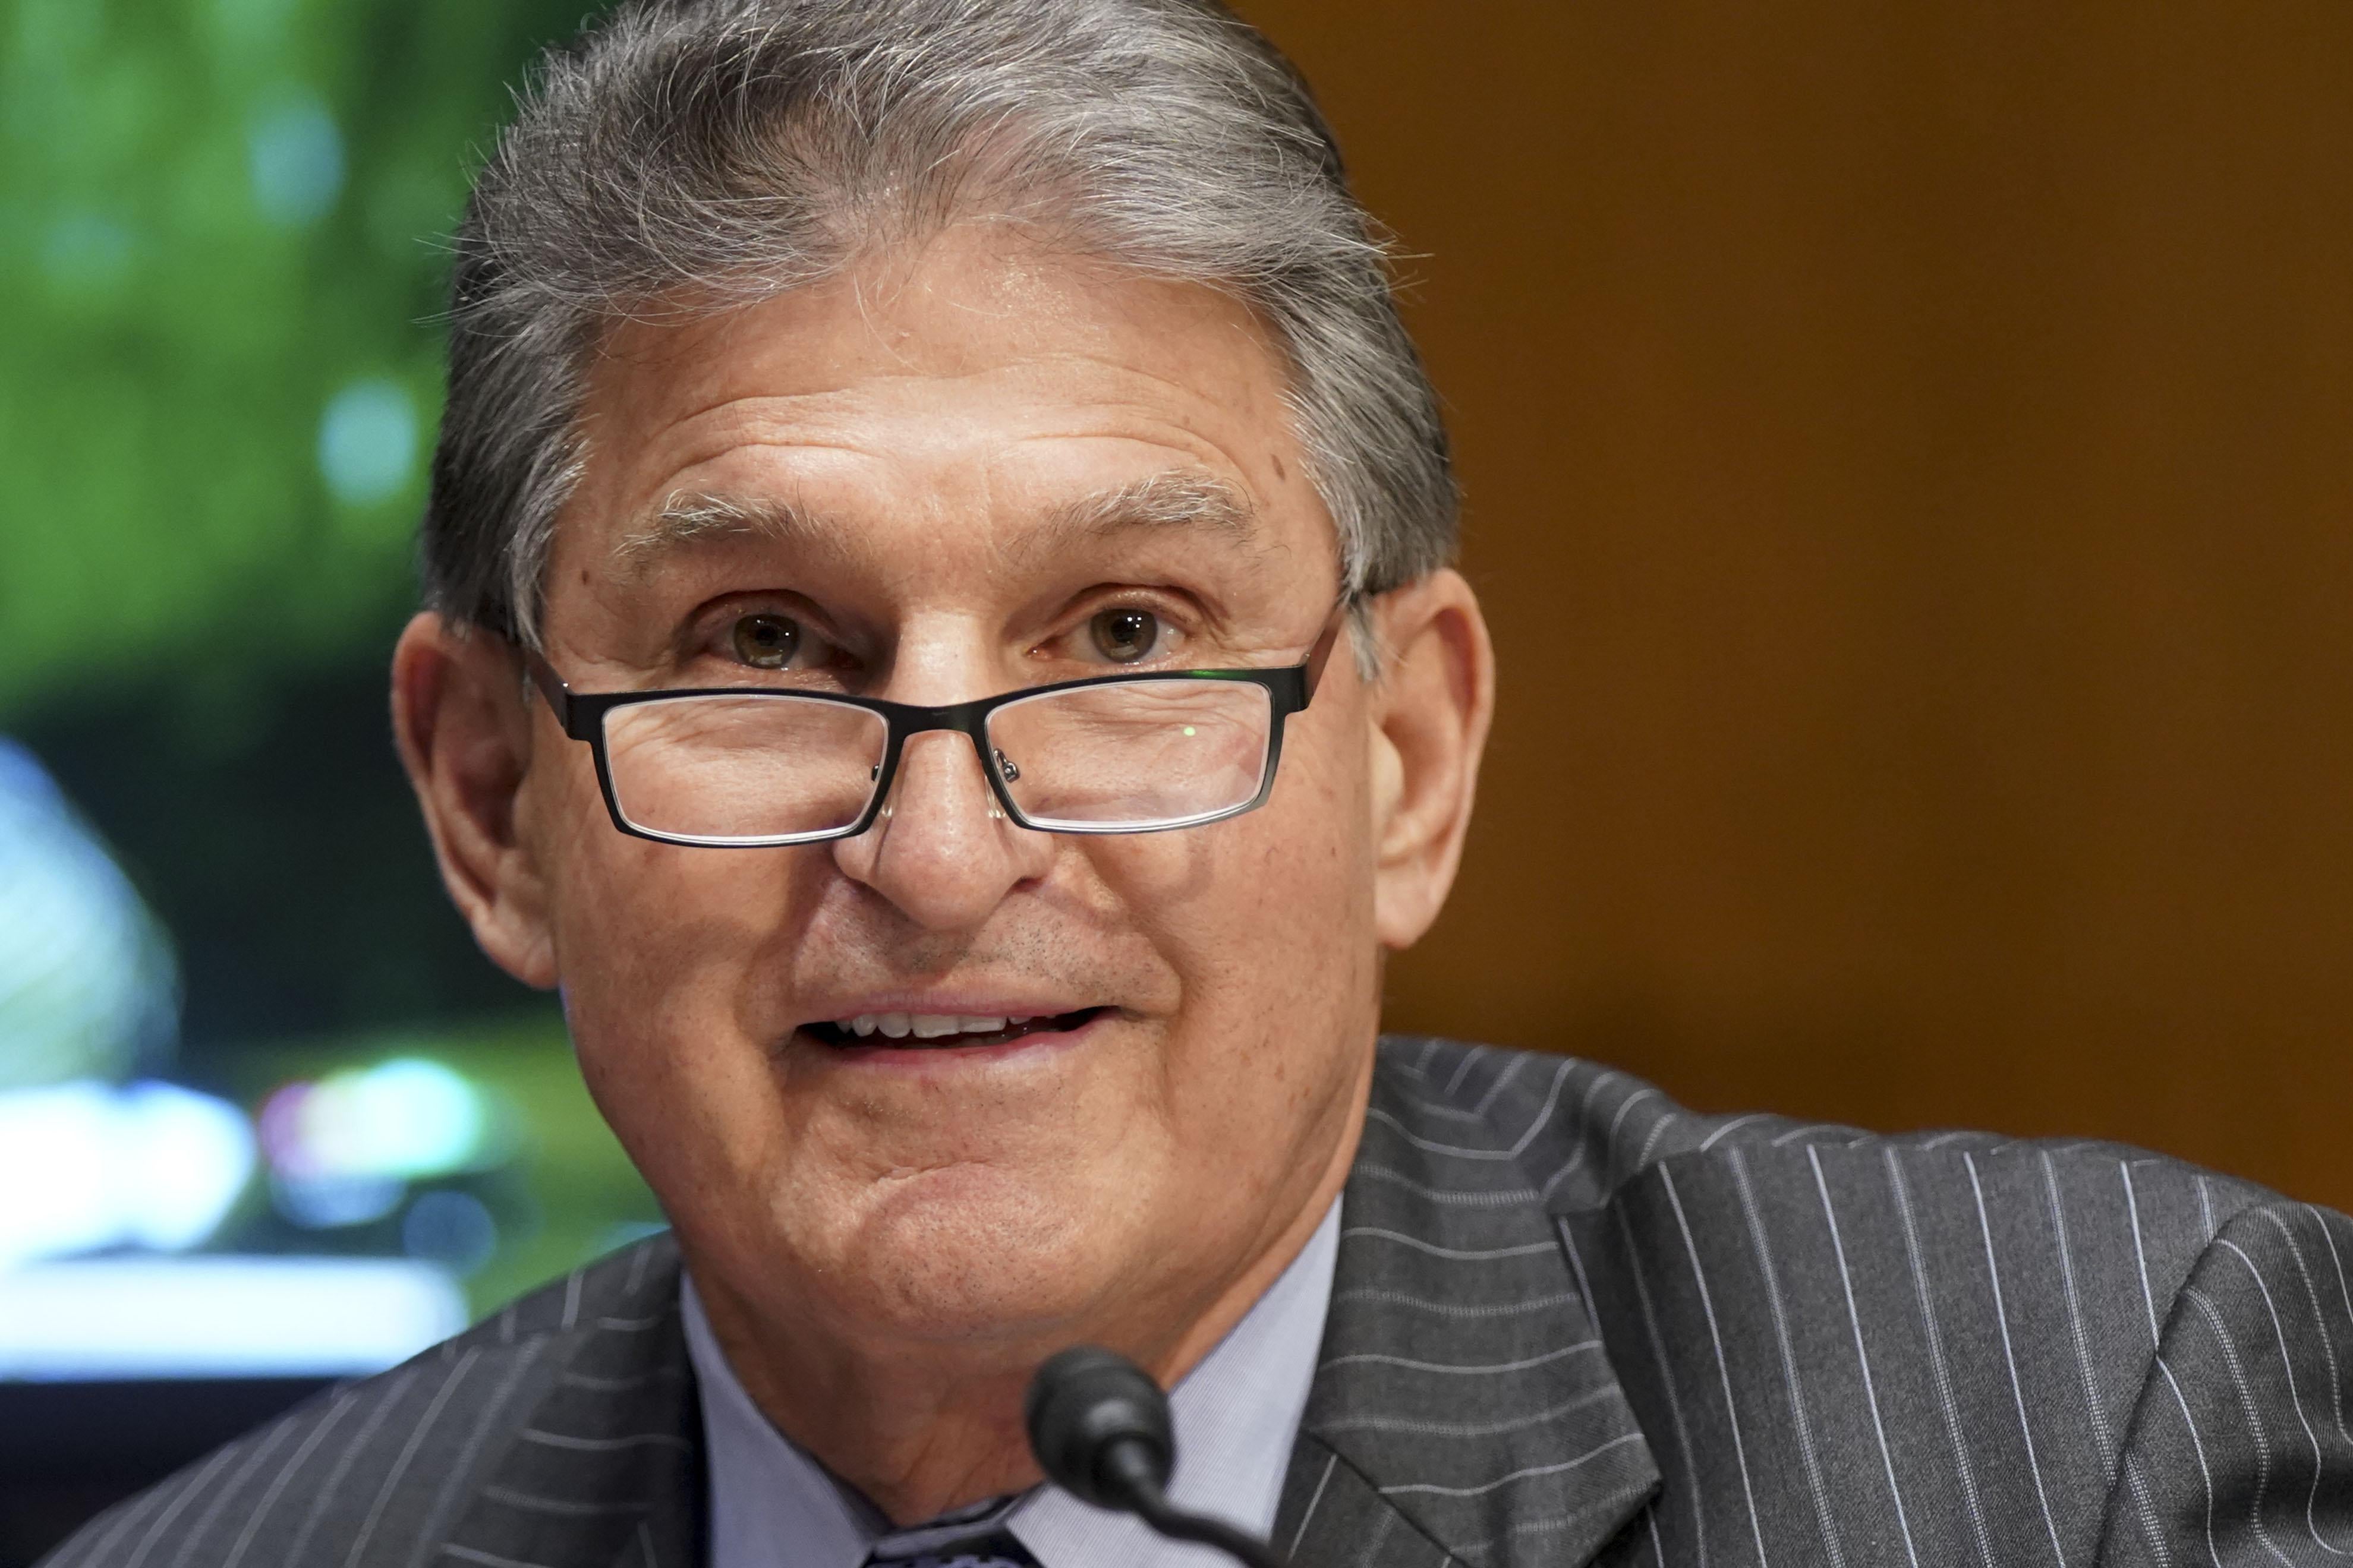 A close up of Manchin during a Senate subcommittee hearing.